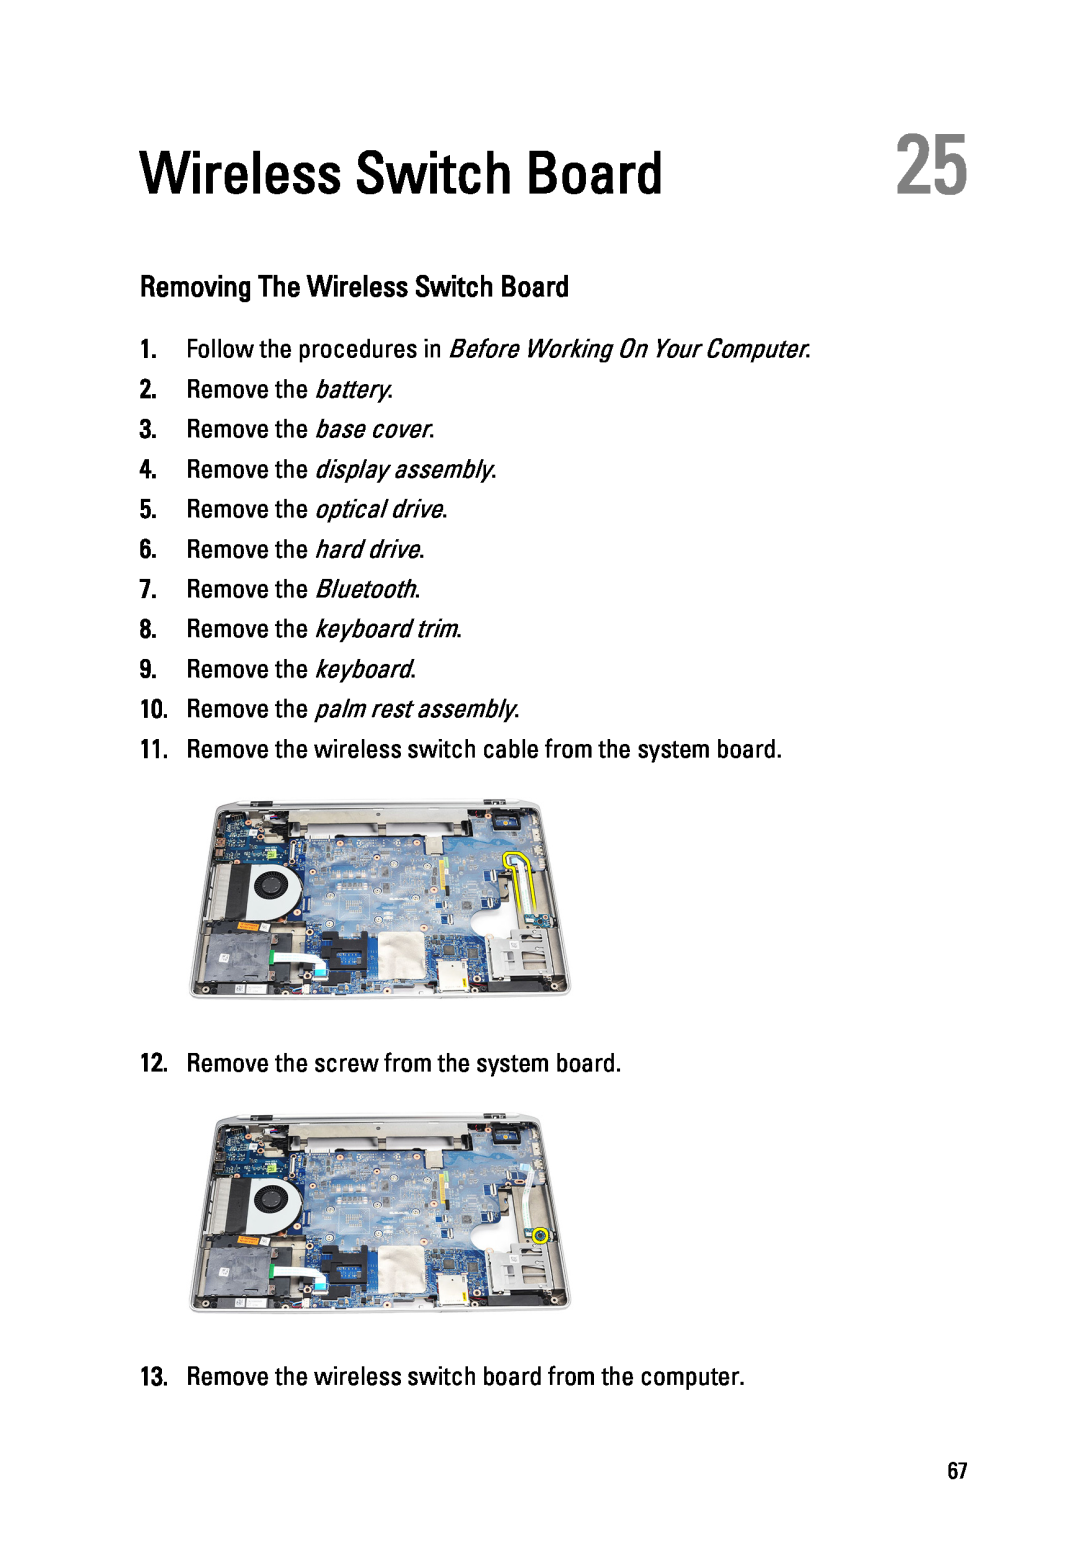 Dell E6520 owner manual Removing The Wireless Switch Board, Follow the procedures in Before Working On Your Computer 